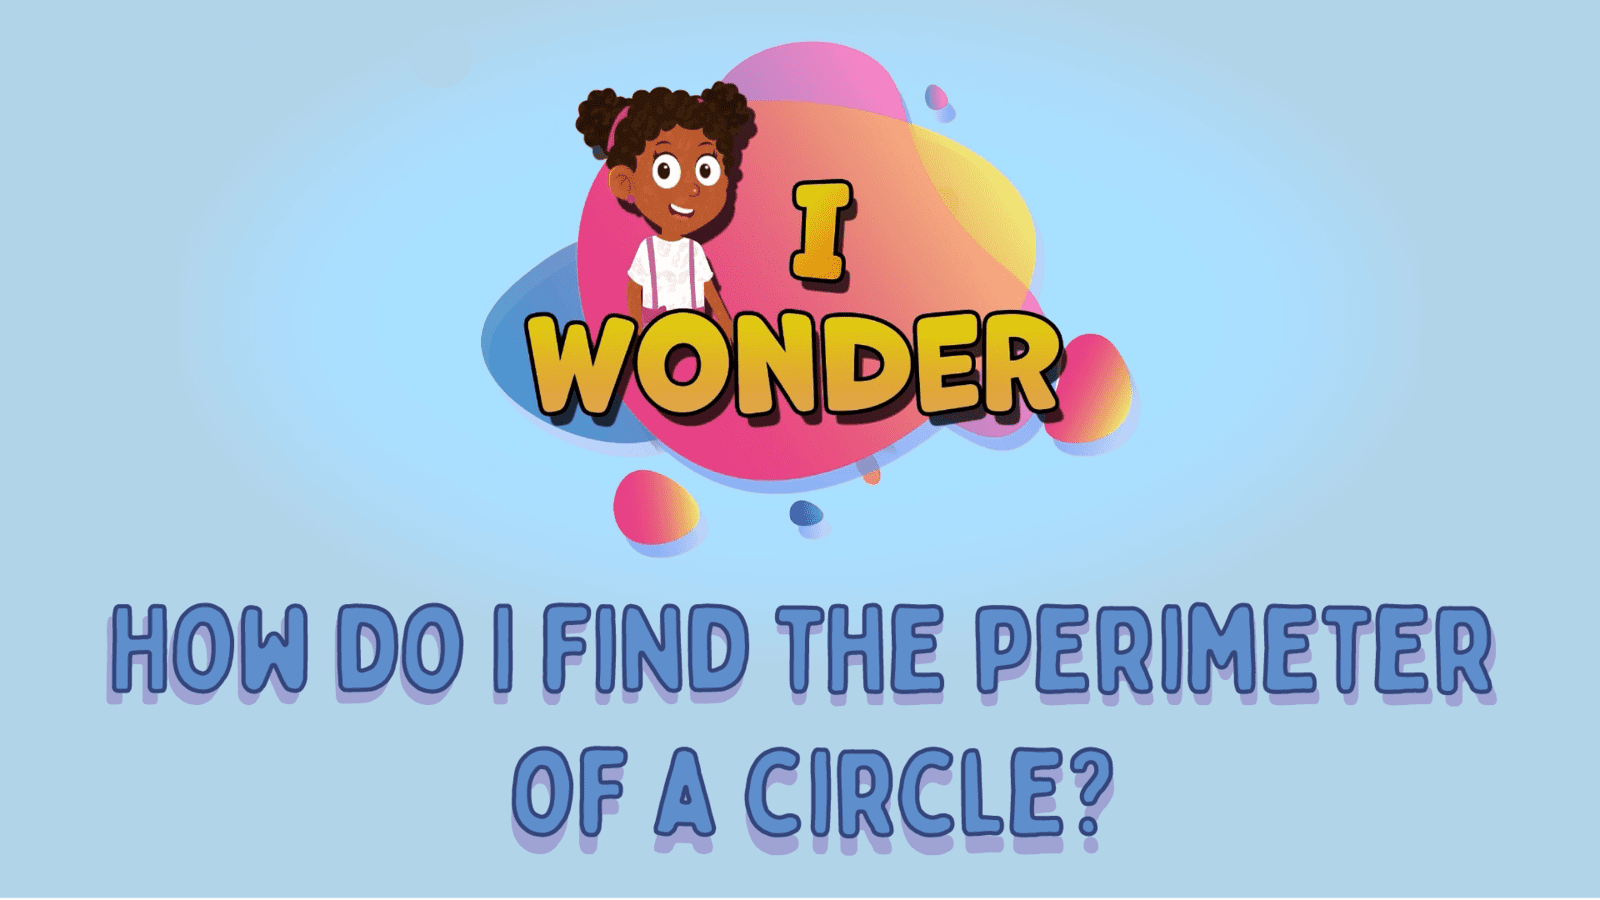 How Do I Find The Perimeter Of A Circle?